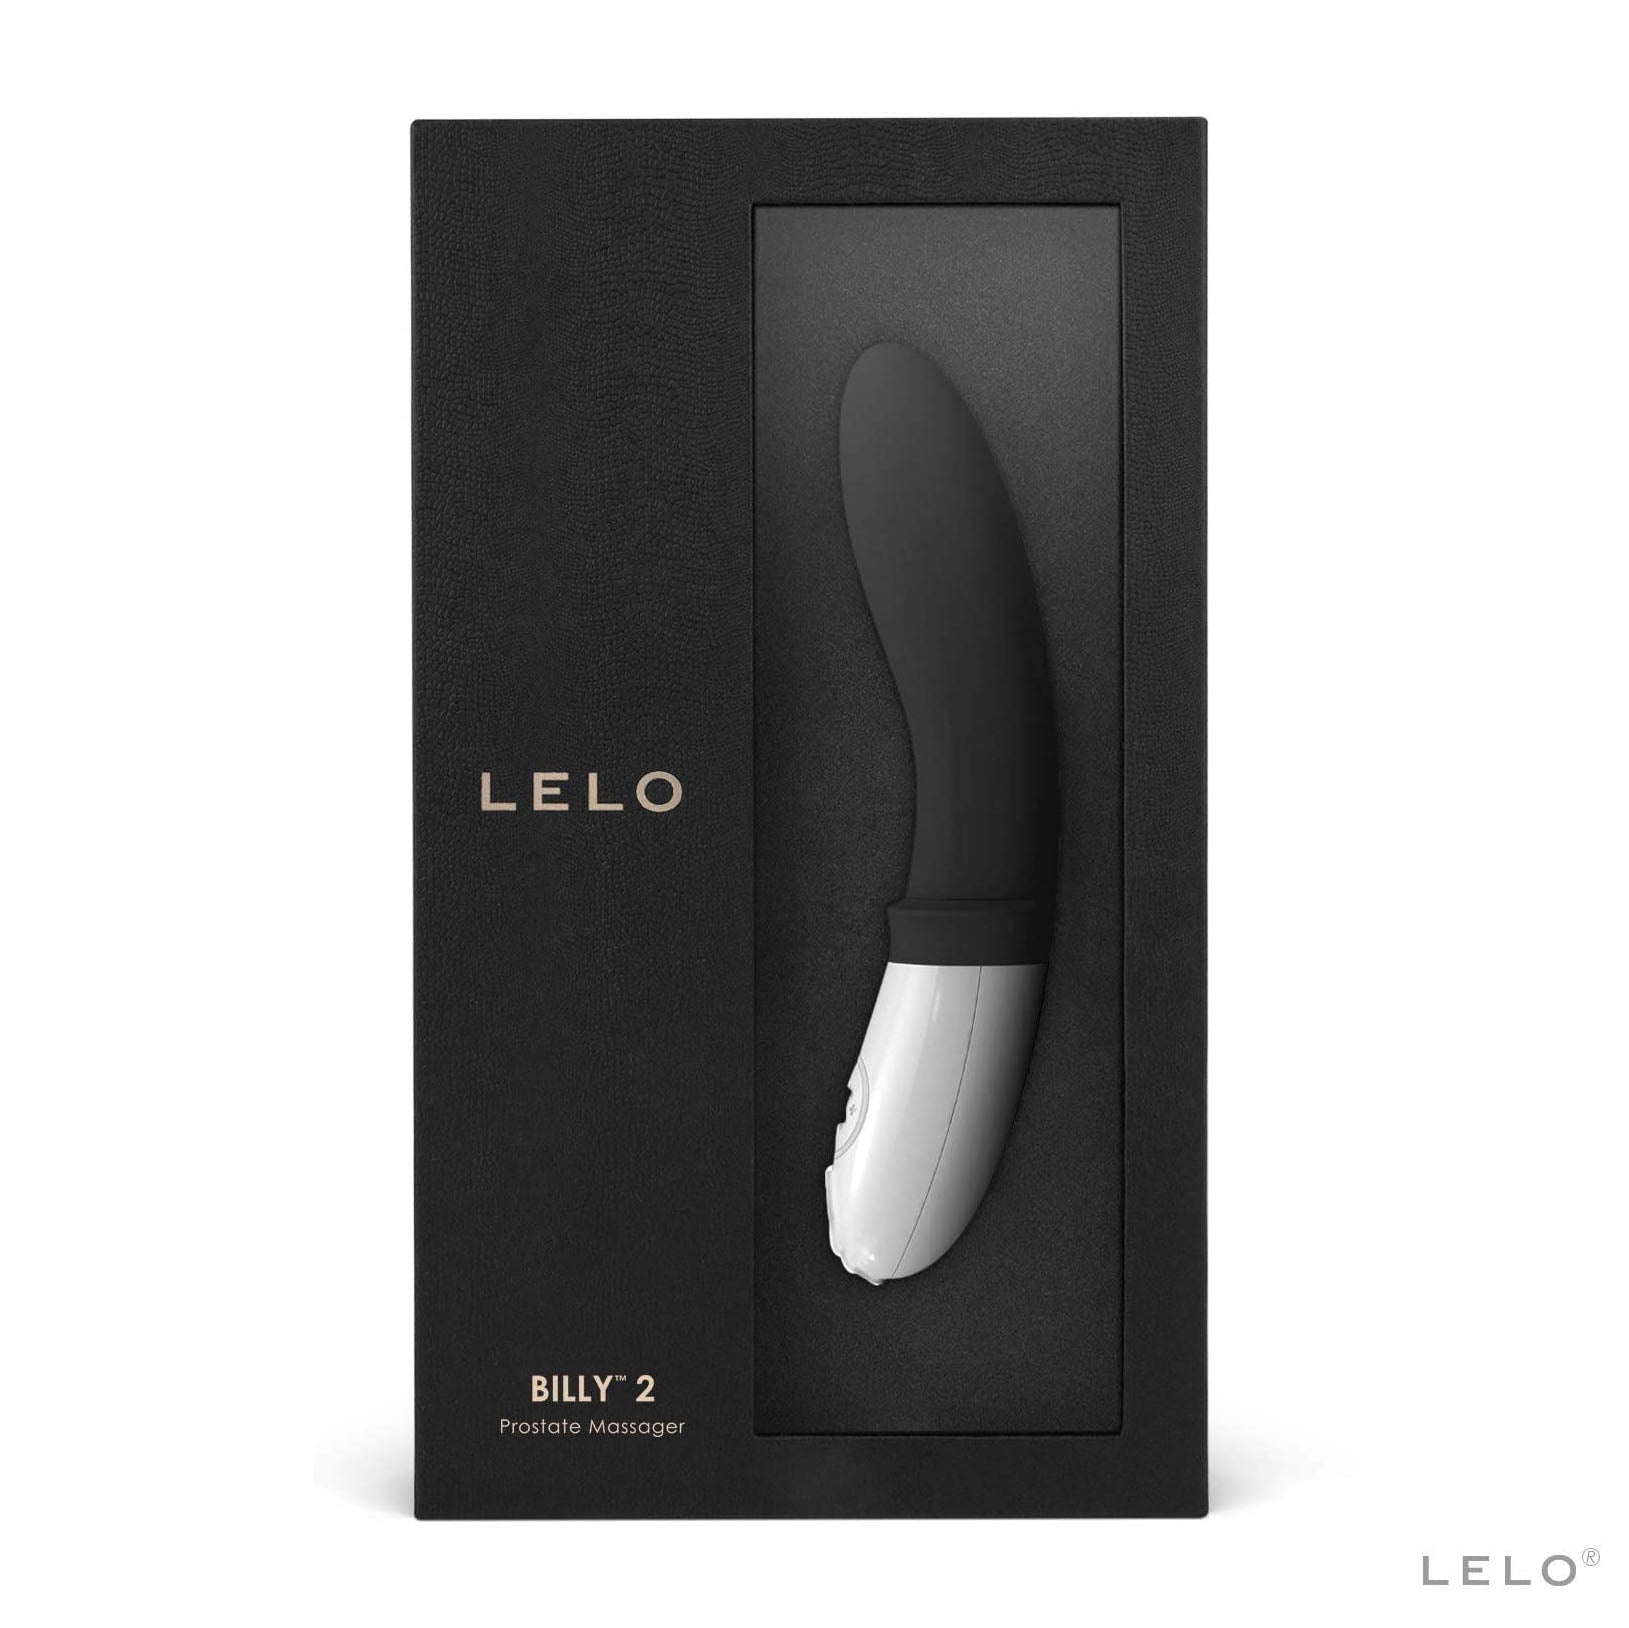 Lelo Billy 2 Deep Black Luxury Rechargeable Prostate Massager > Branded Toys > Lelo 6.5 Inches, Lelo, Male, NEWLY-IMPORTED, Silicone - So Luxe Lingerie